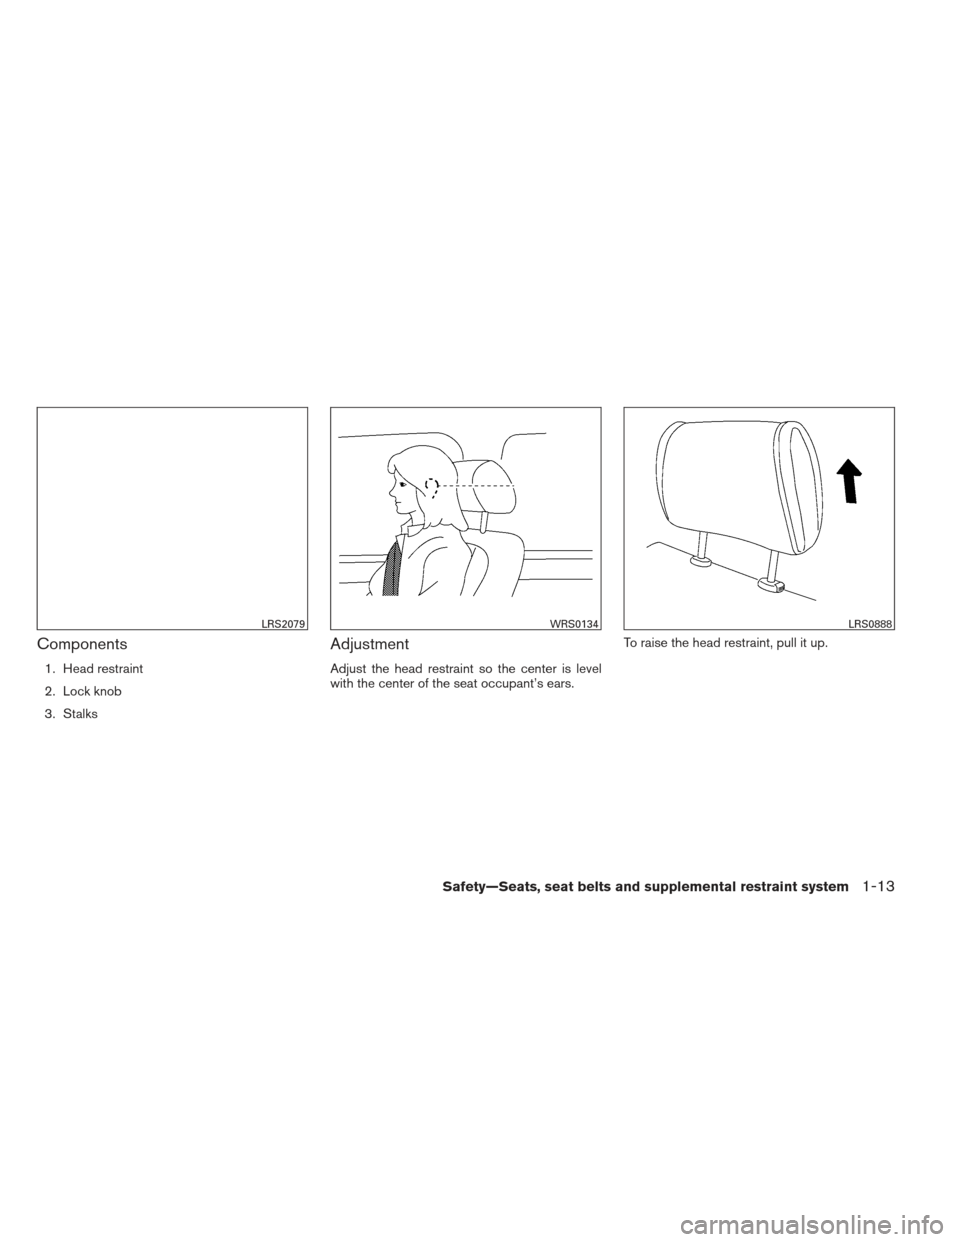 NISSAN PATHFINDER 2013 R52 / 4.G Owners Manual Components
1. Head restraint
2. Lock knob
3. Stalks
Adjustment
Adjust the head restraint so the center is level
with the center of the seat occupant’s ears.To raise the head restraint, pull it up.
L